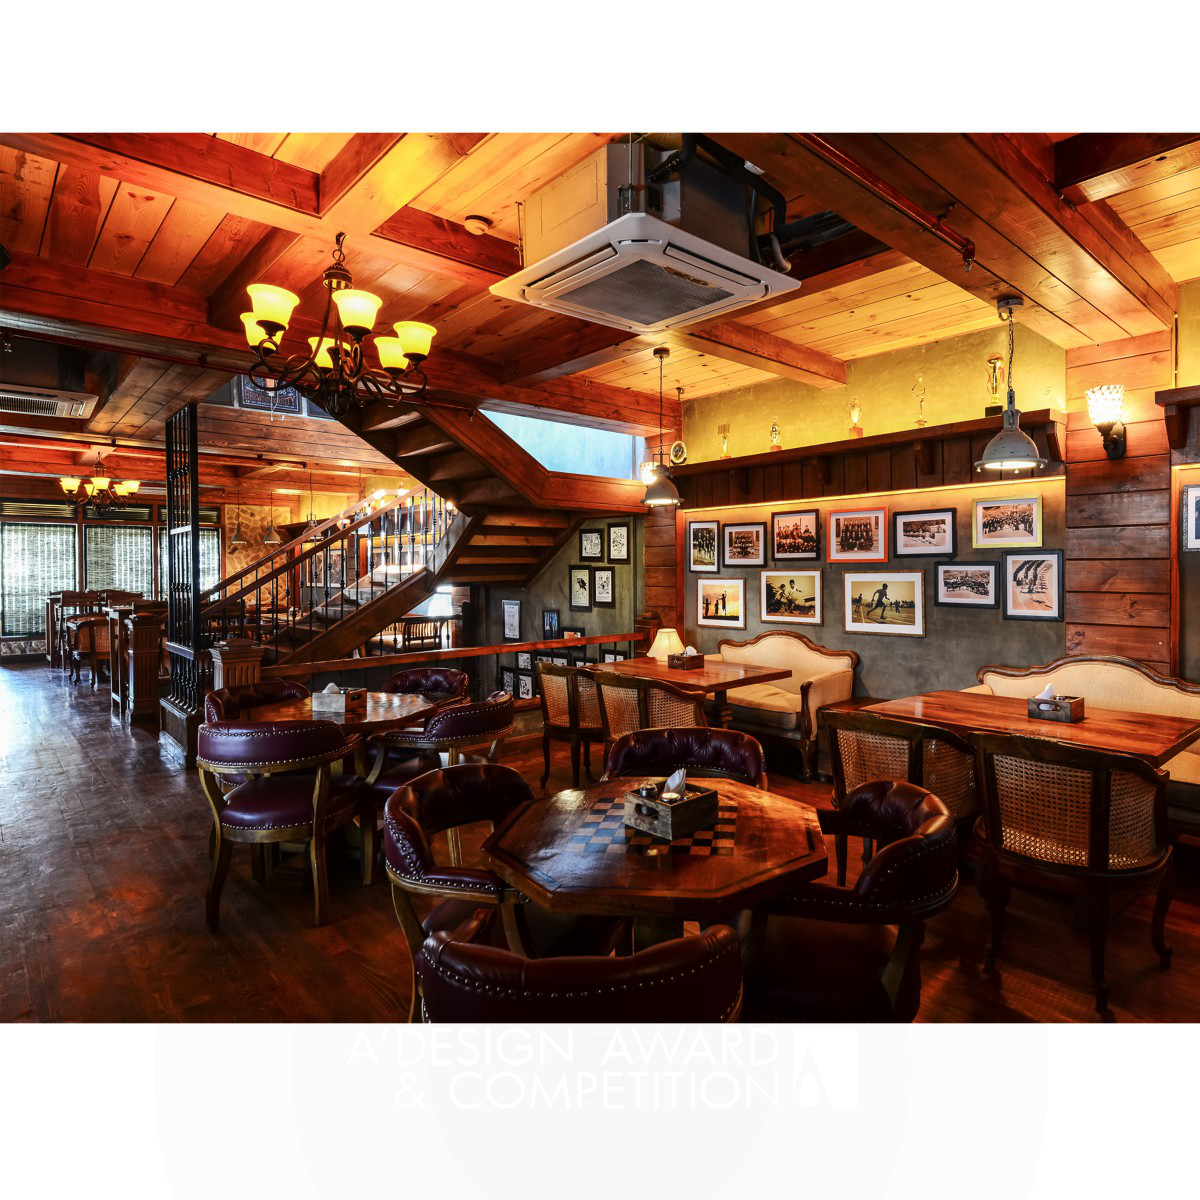 The Clock Tower restaurant and bar by devesh pratyay